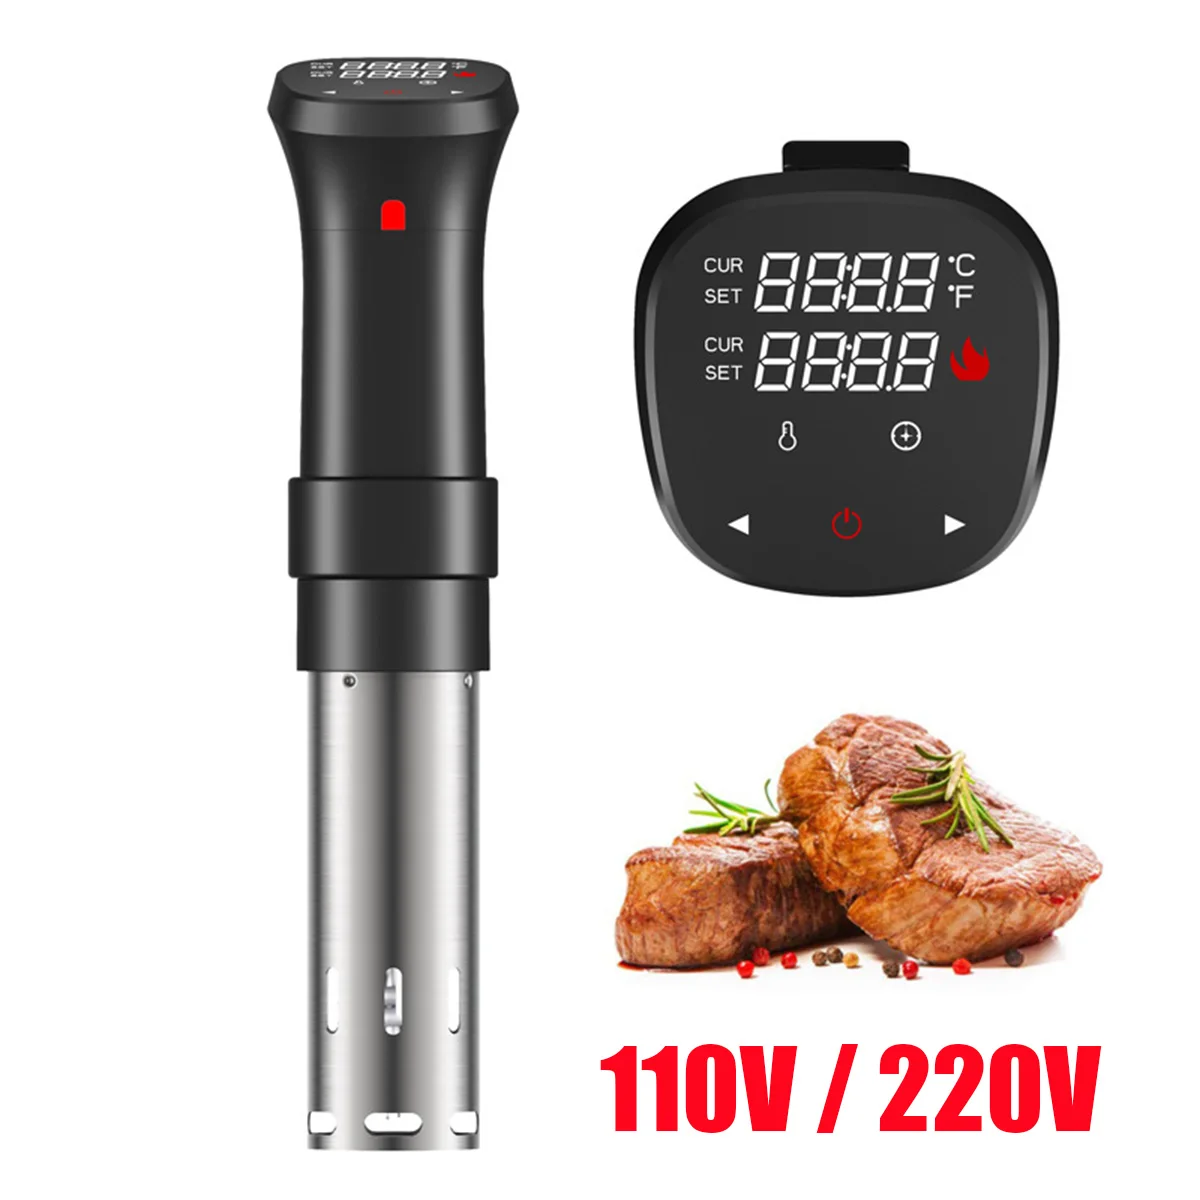 

1100W LCD Sous Vide Cooker Vacuum Slow Cooker Steak Cooking Machine Sturdy Immersion Circulator Digital Timer Accurate Control